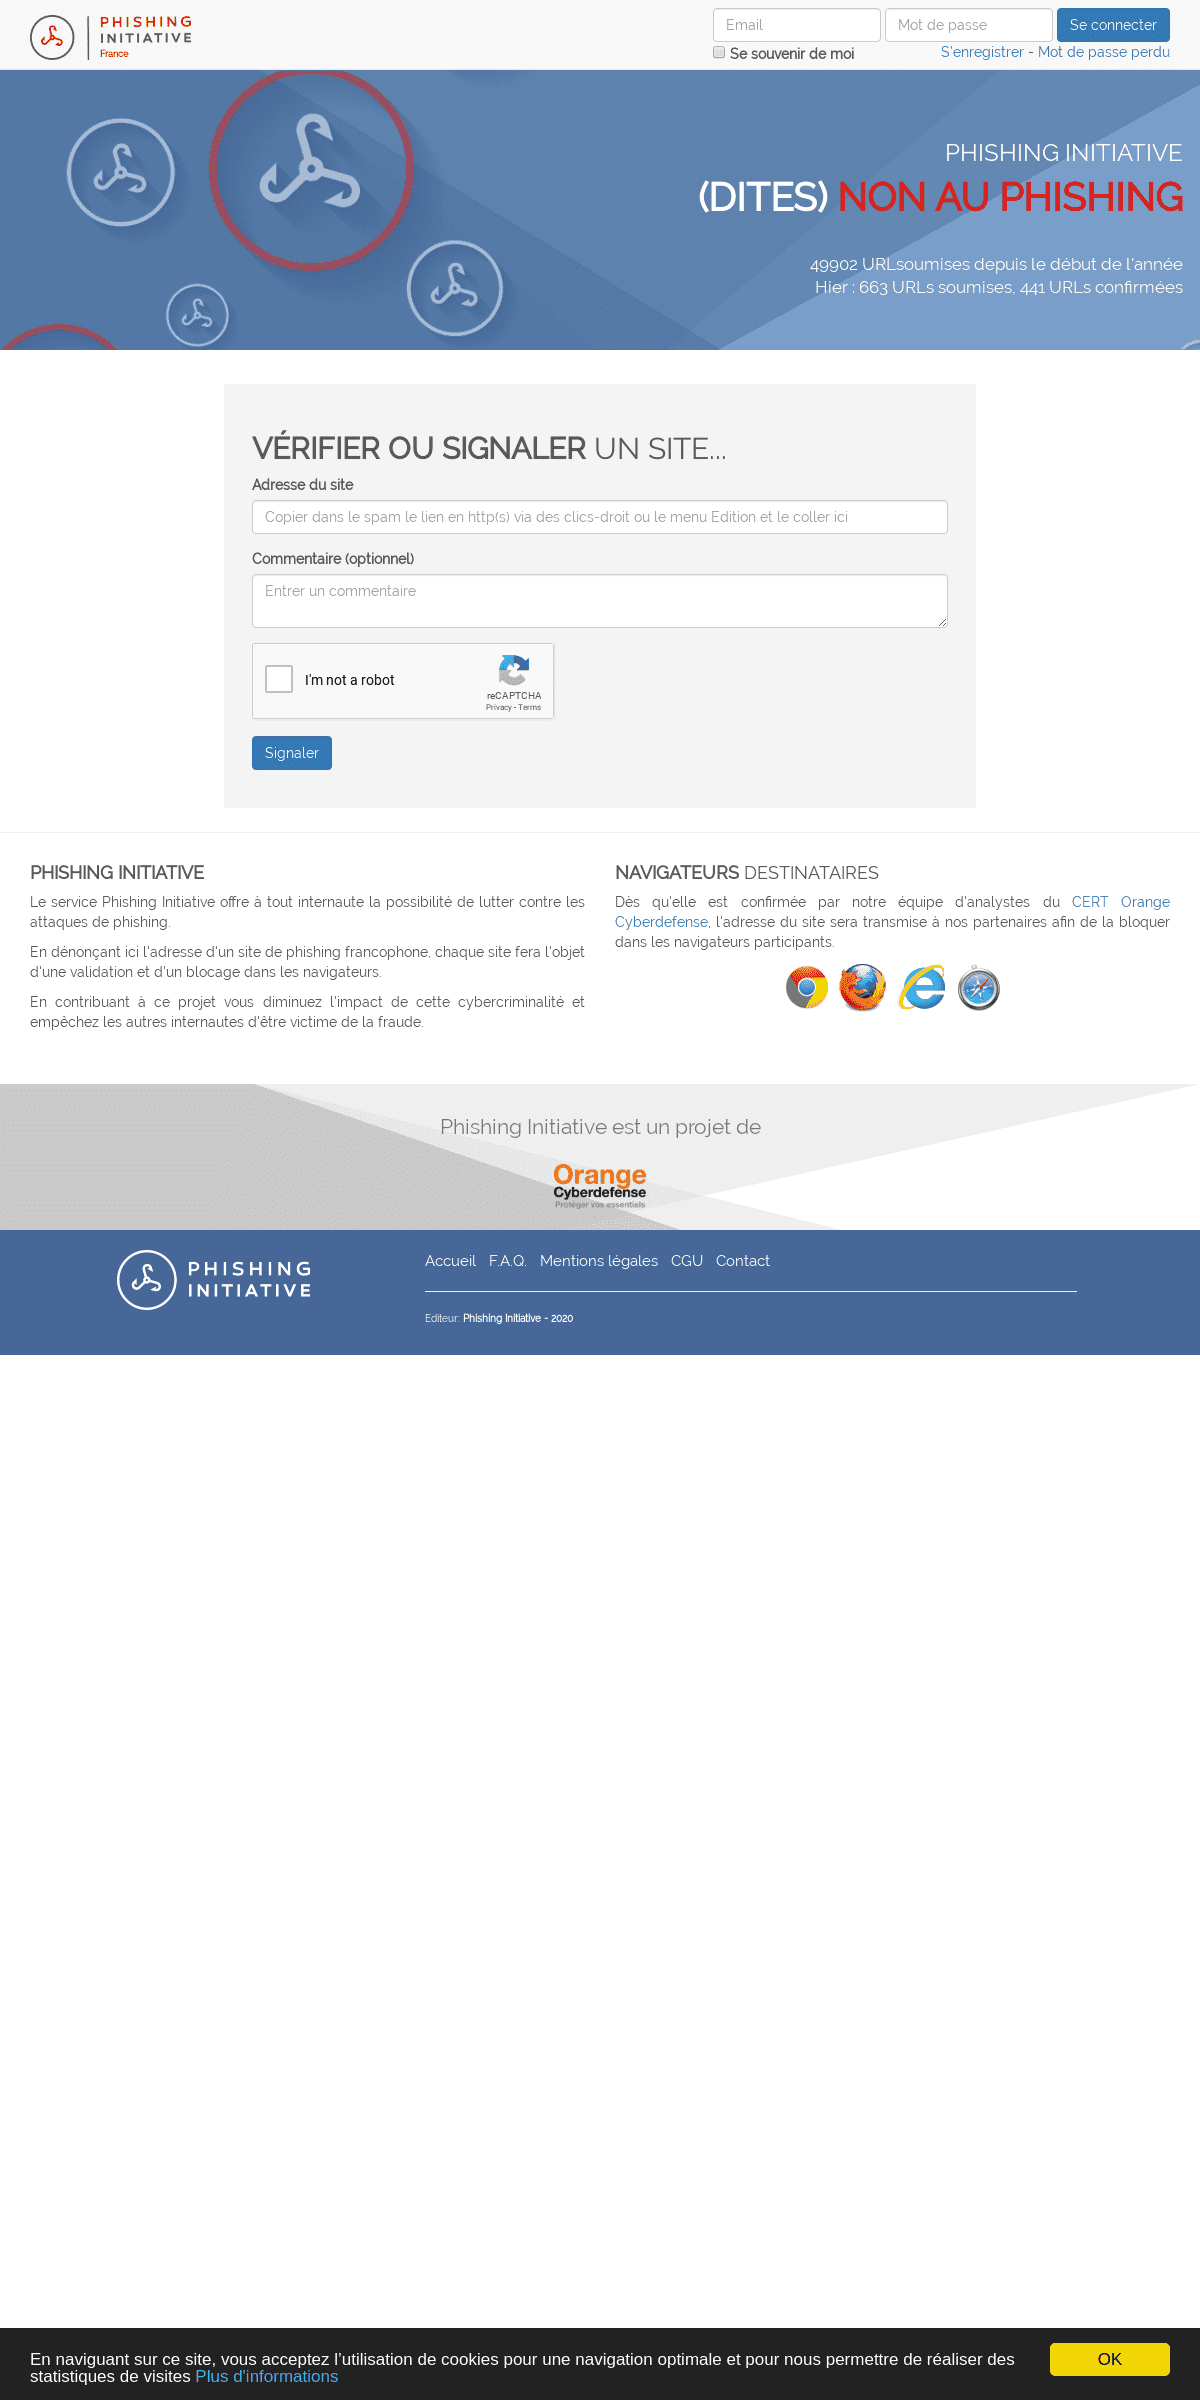 A complete backup of phishing-initiative.fr